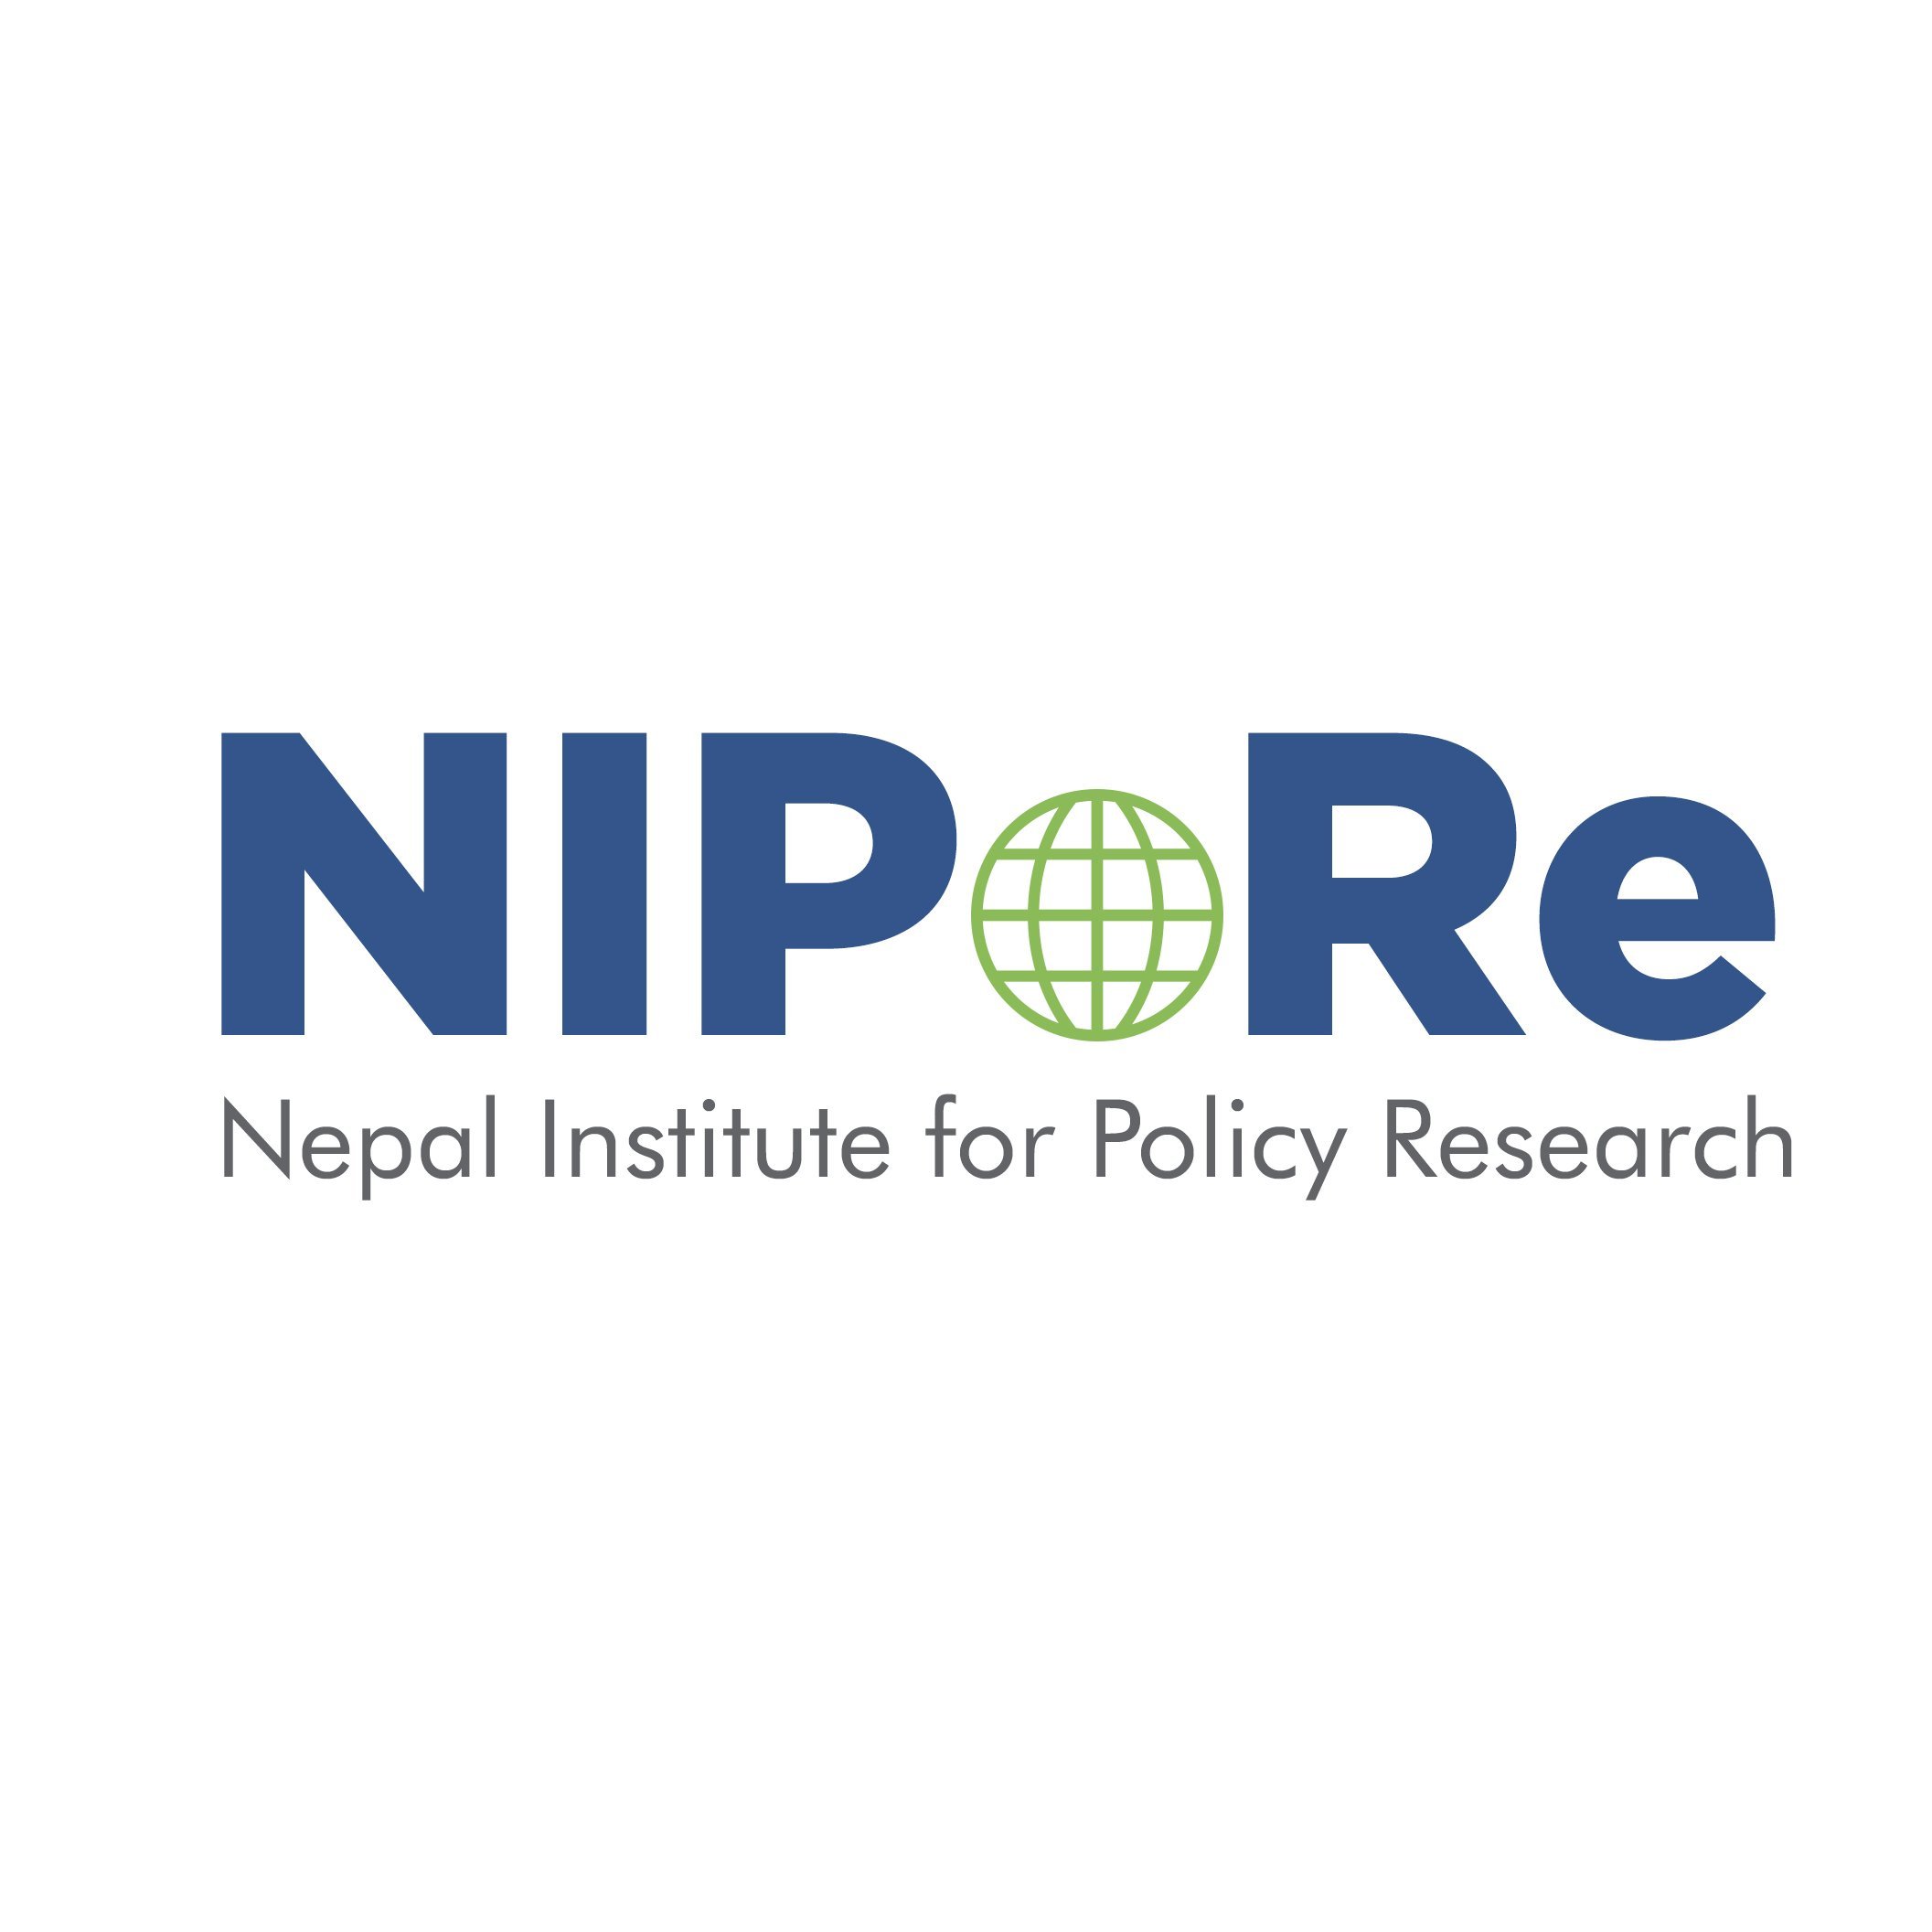 Think tank undertaking independent and non-partisan research and analysis on high-priority policy issues from Nepal and Asia

e-mail: info@nipore.org